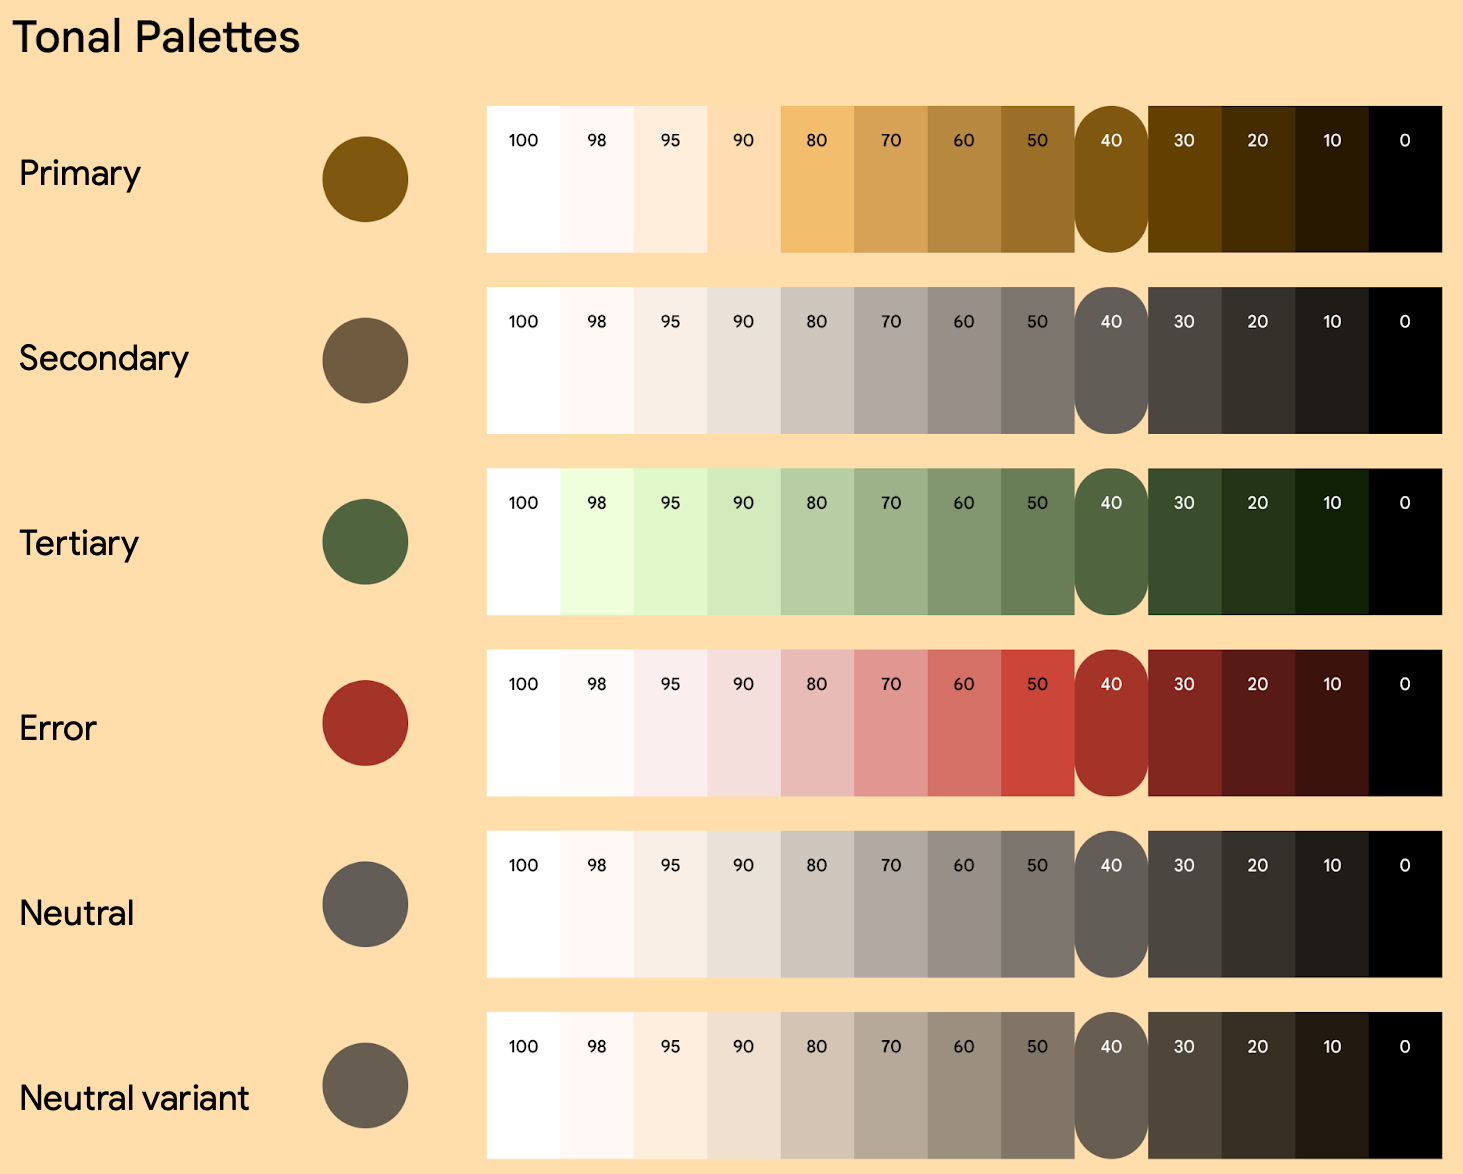 Example of generating a given tonal palettes